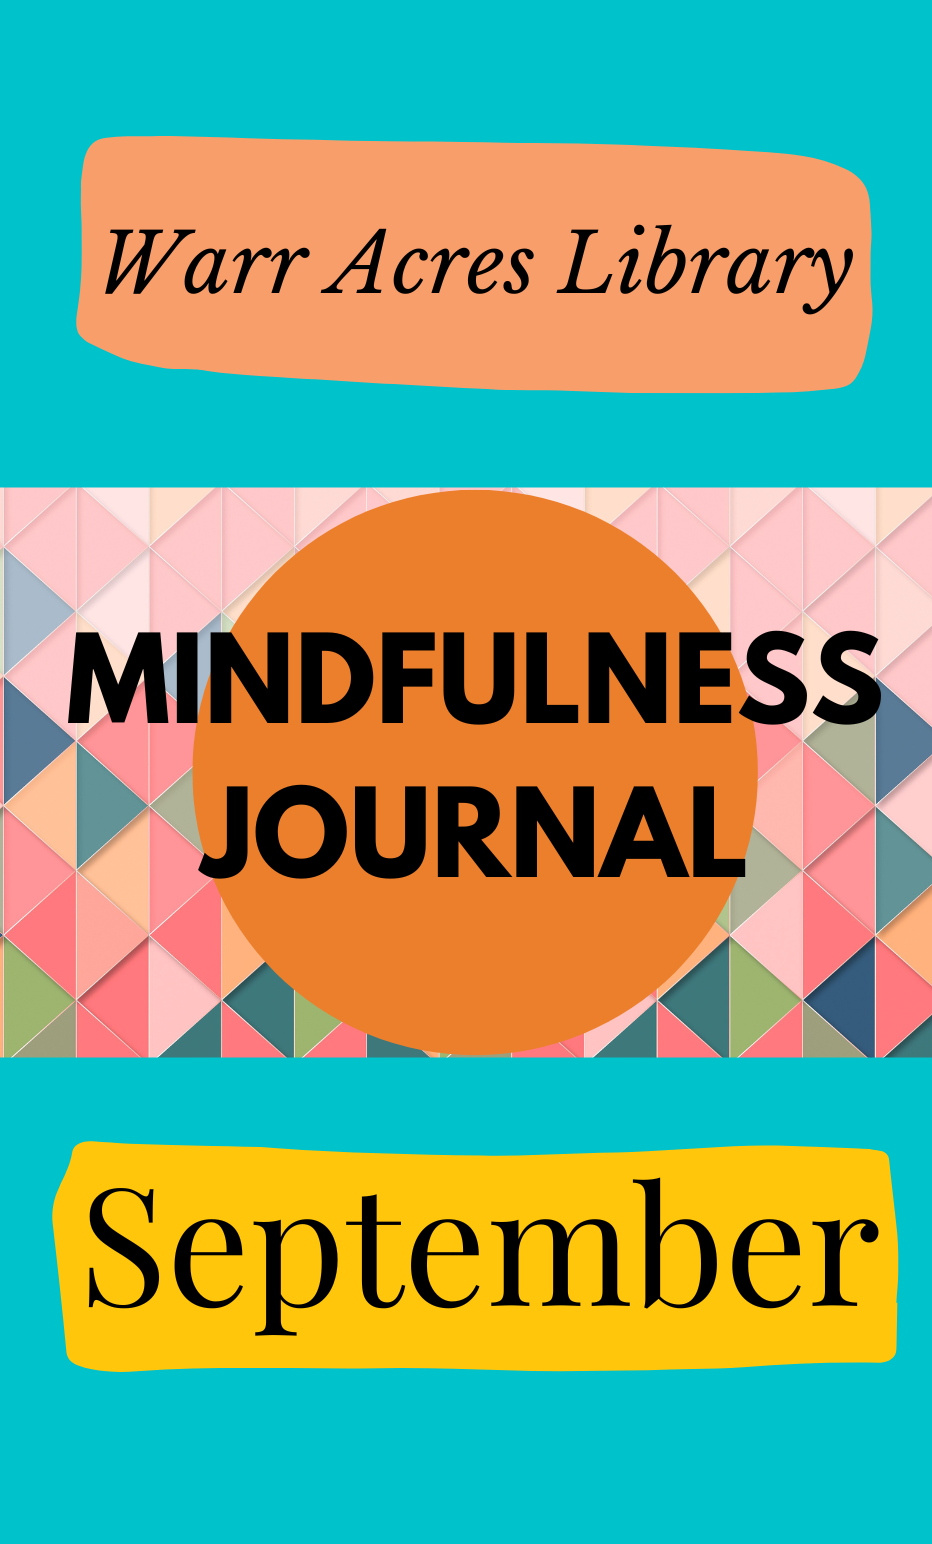 A colorful cover that says, "Warr Acres Library Mindfulness Journal September."